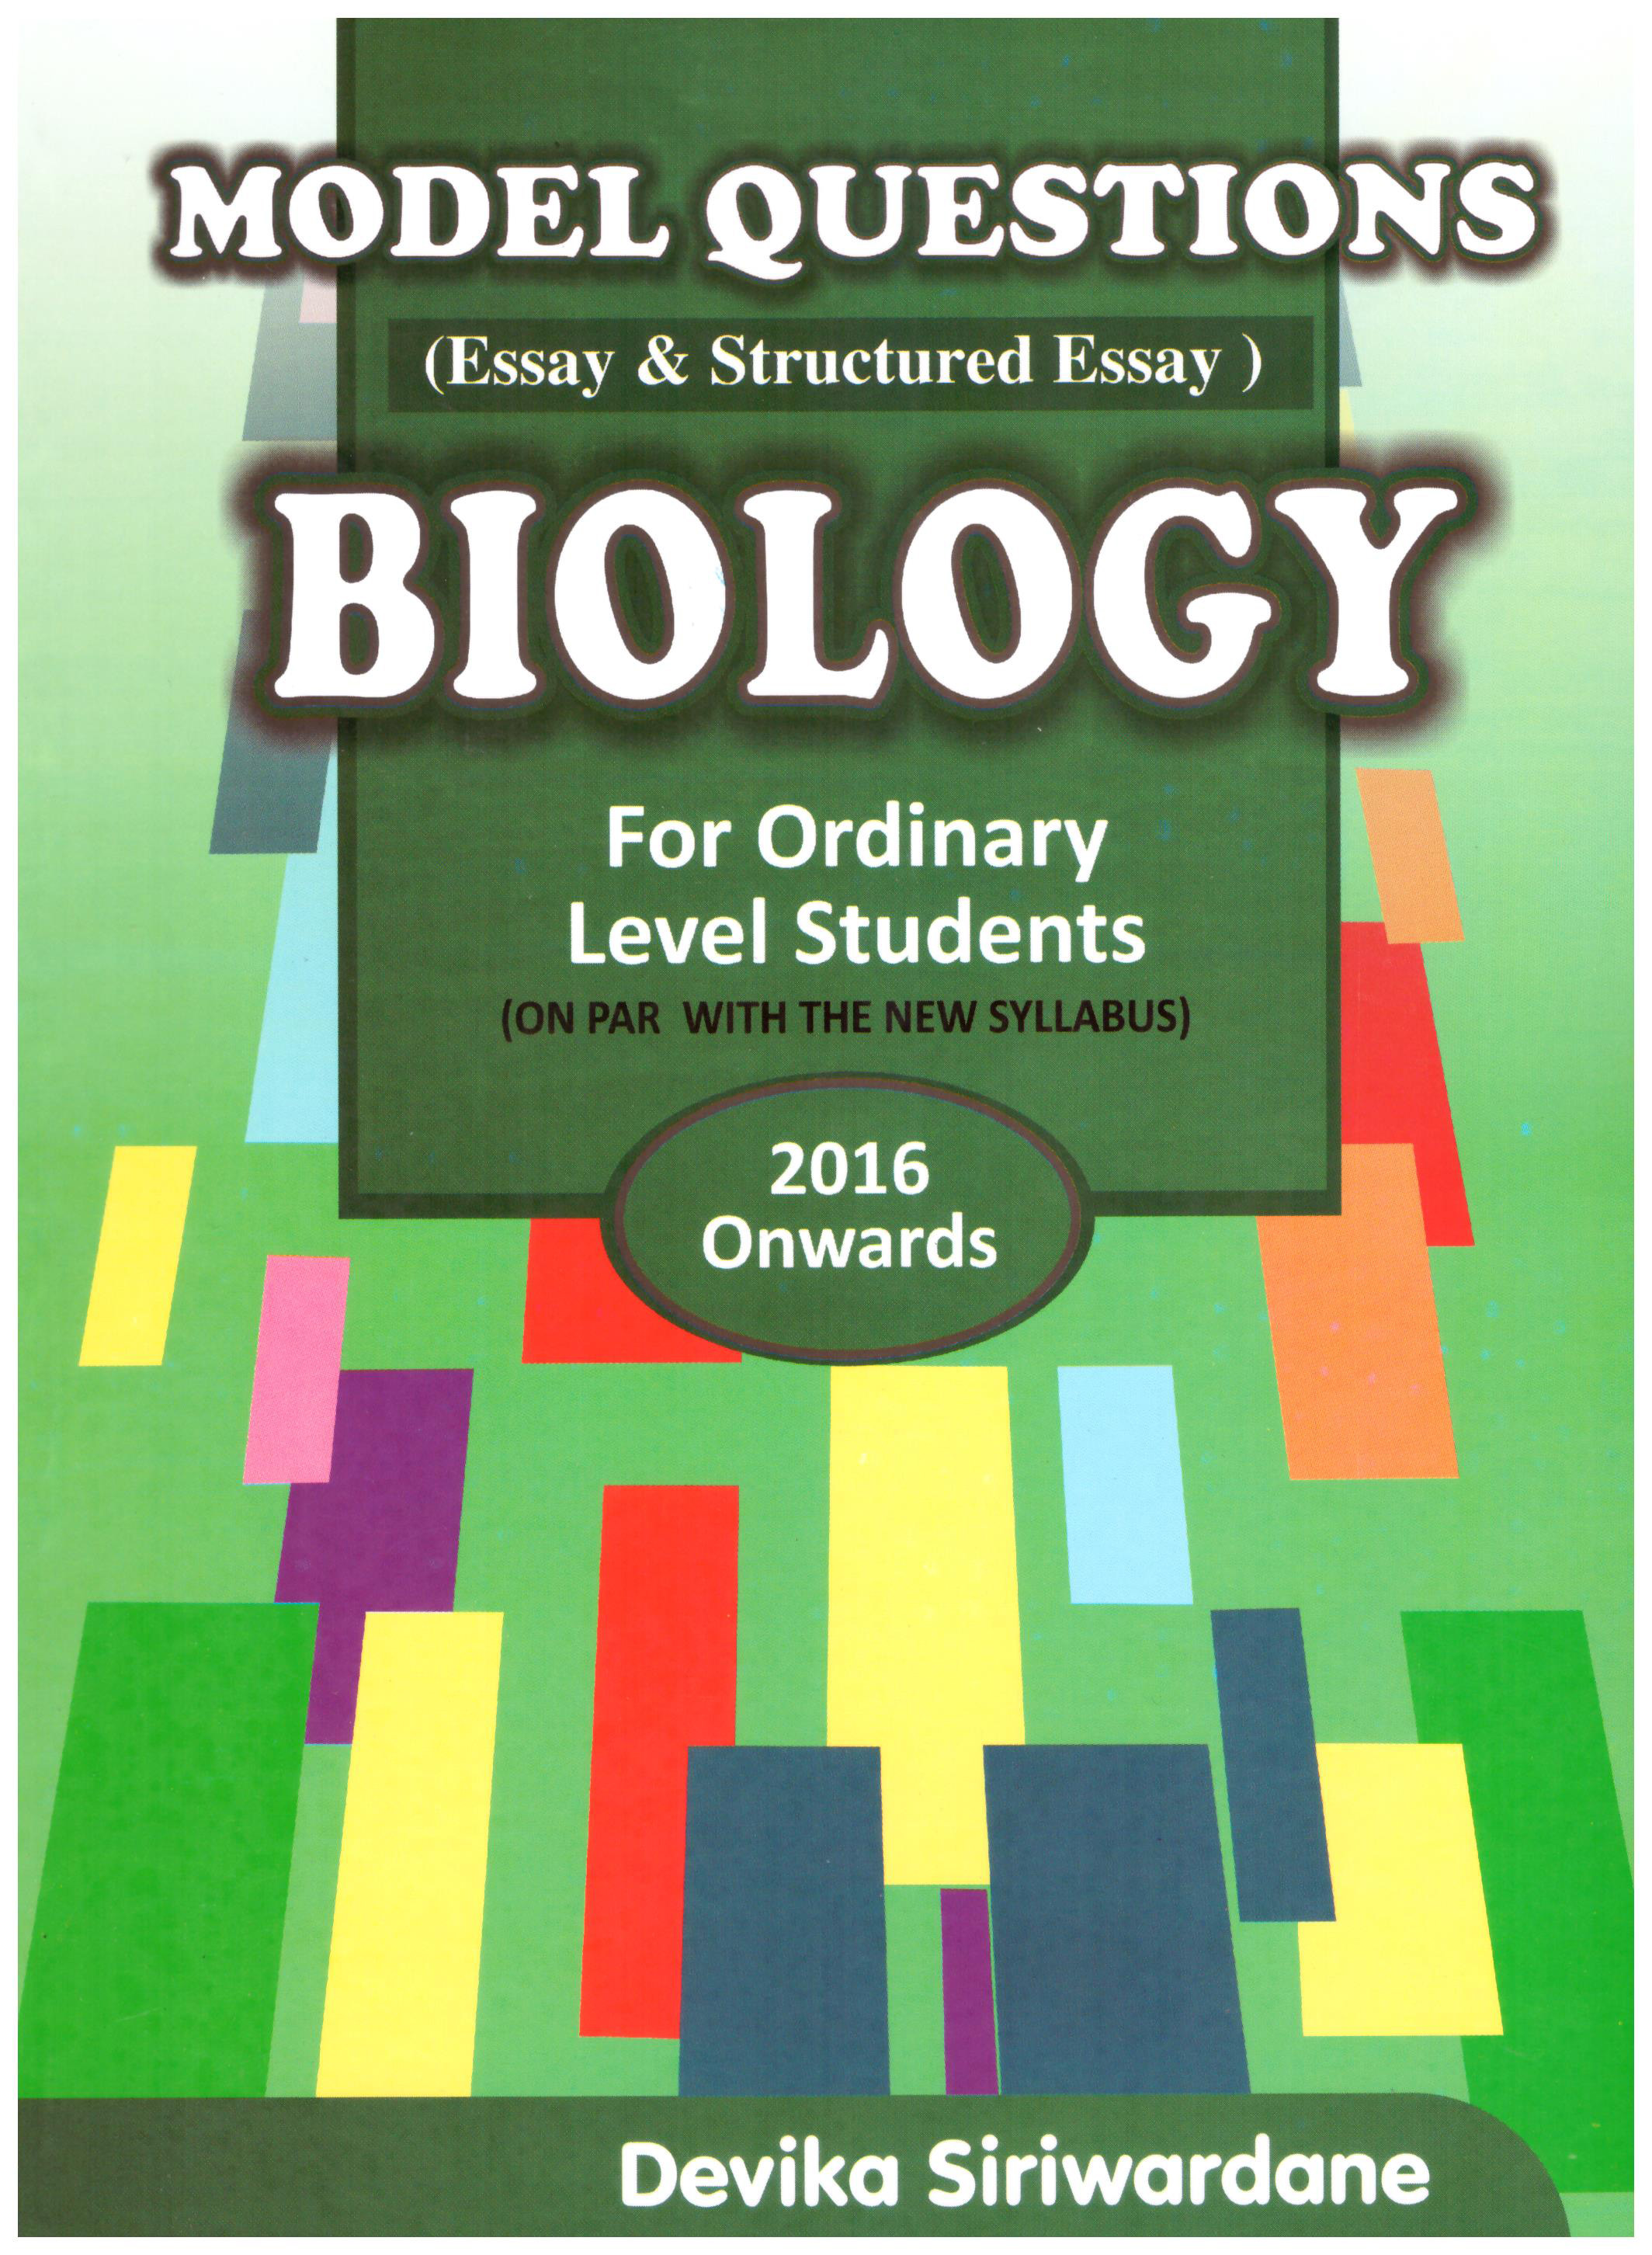 Model Questions Biology For Odinary Level Students 2016 onwards 